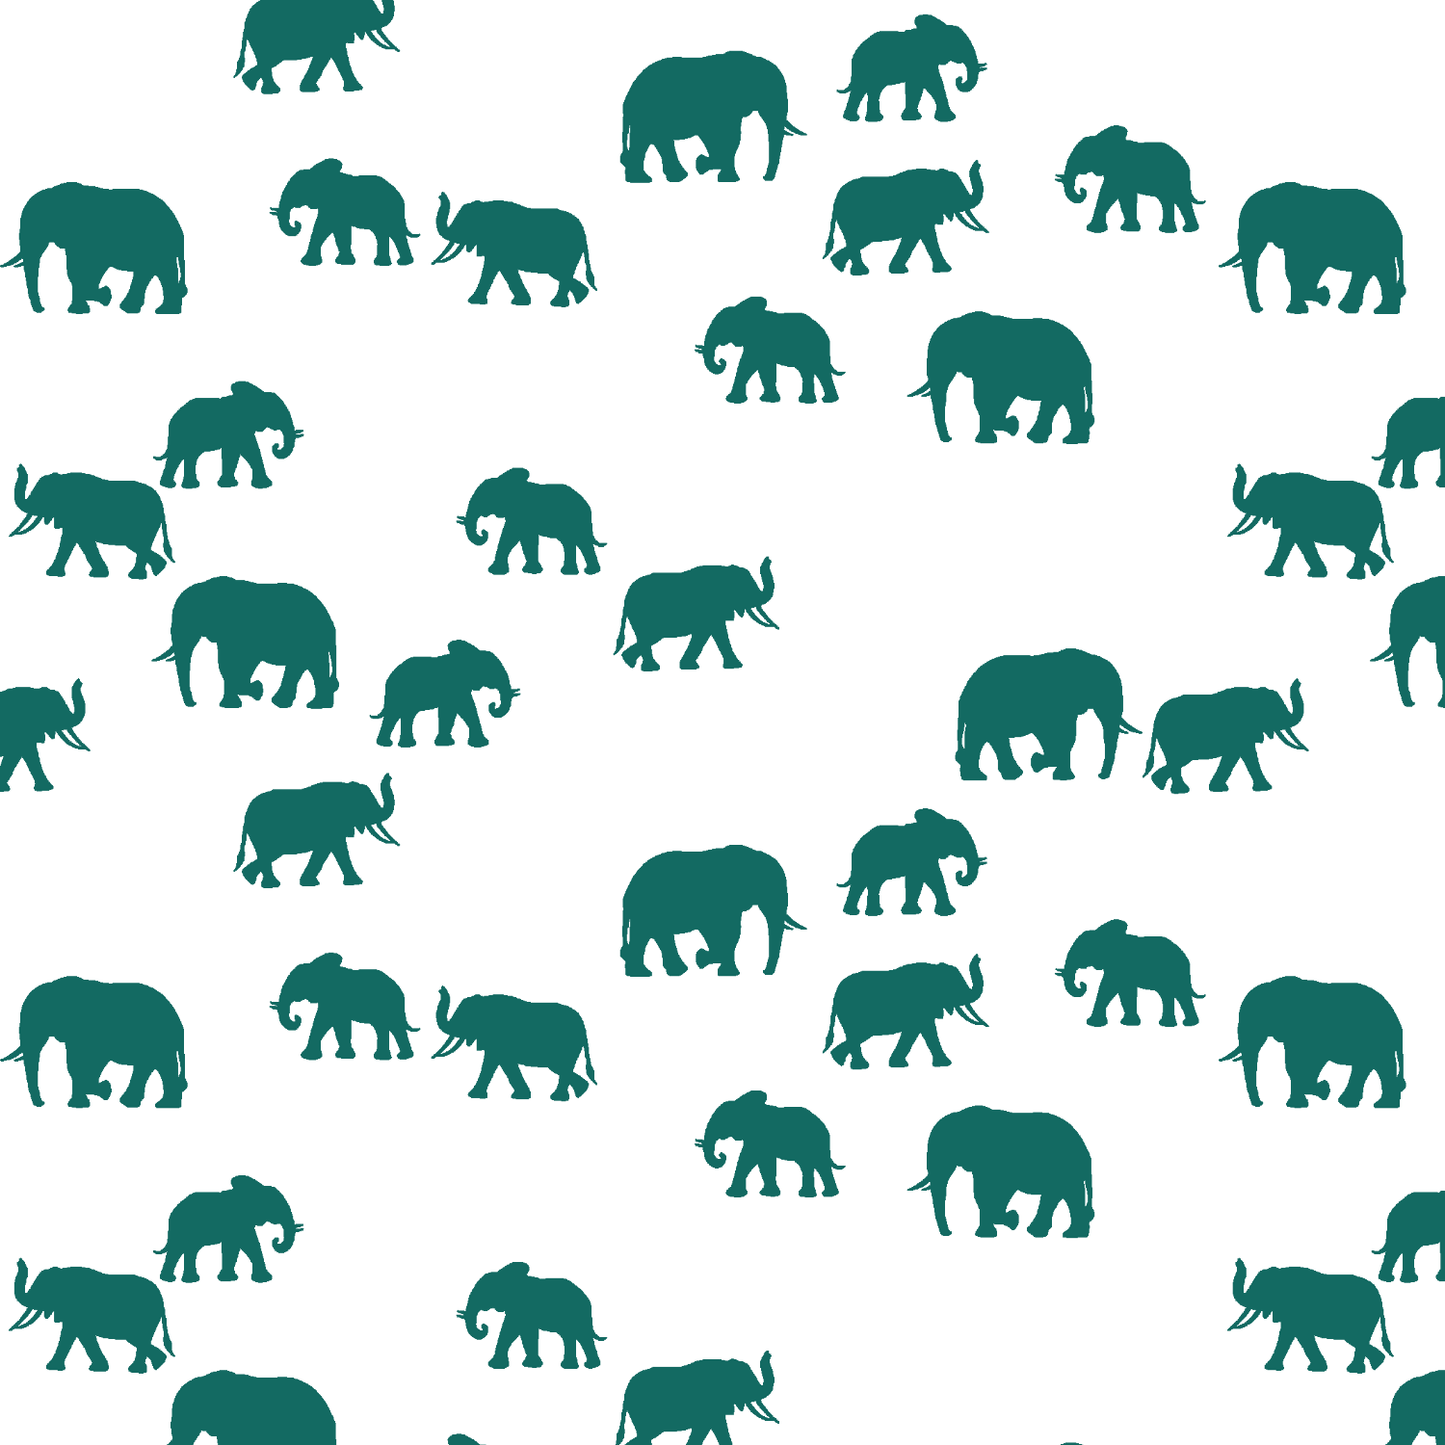 Elephant Silhouette in Emerald on White